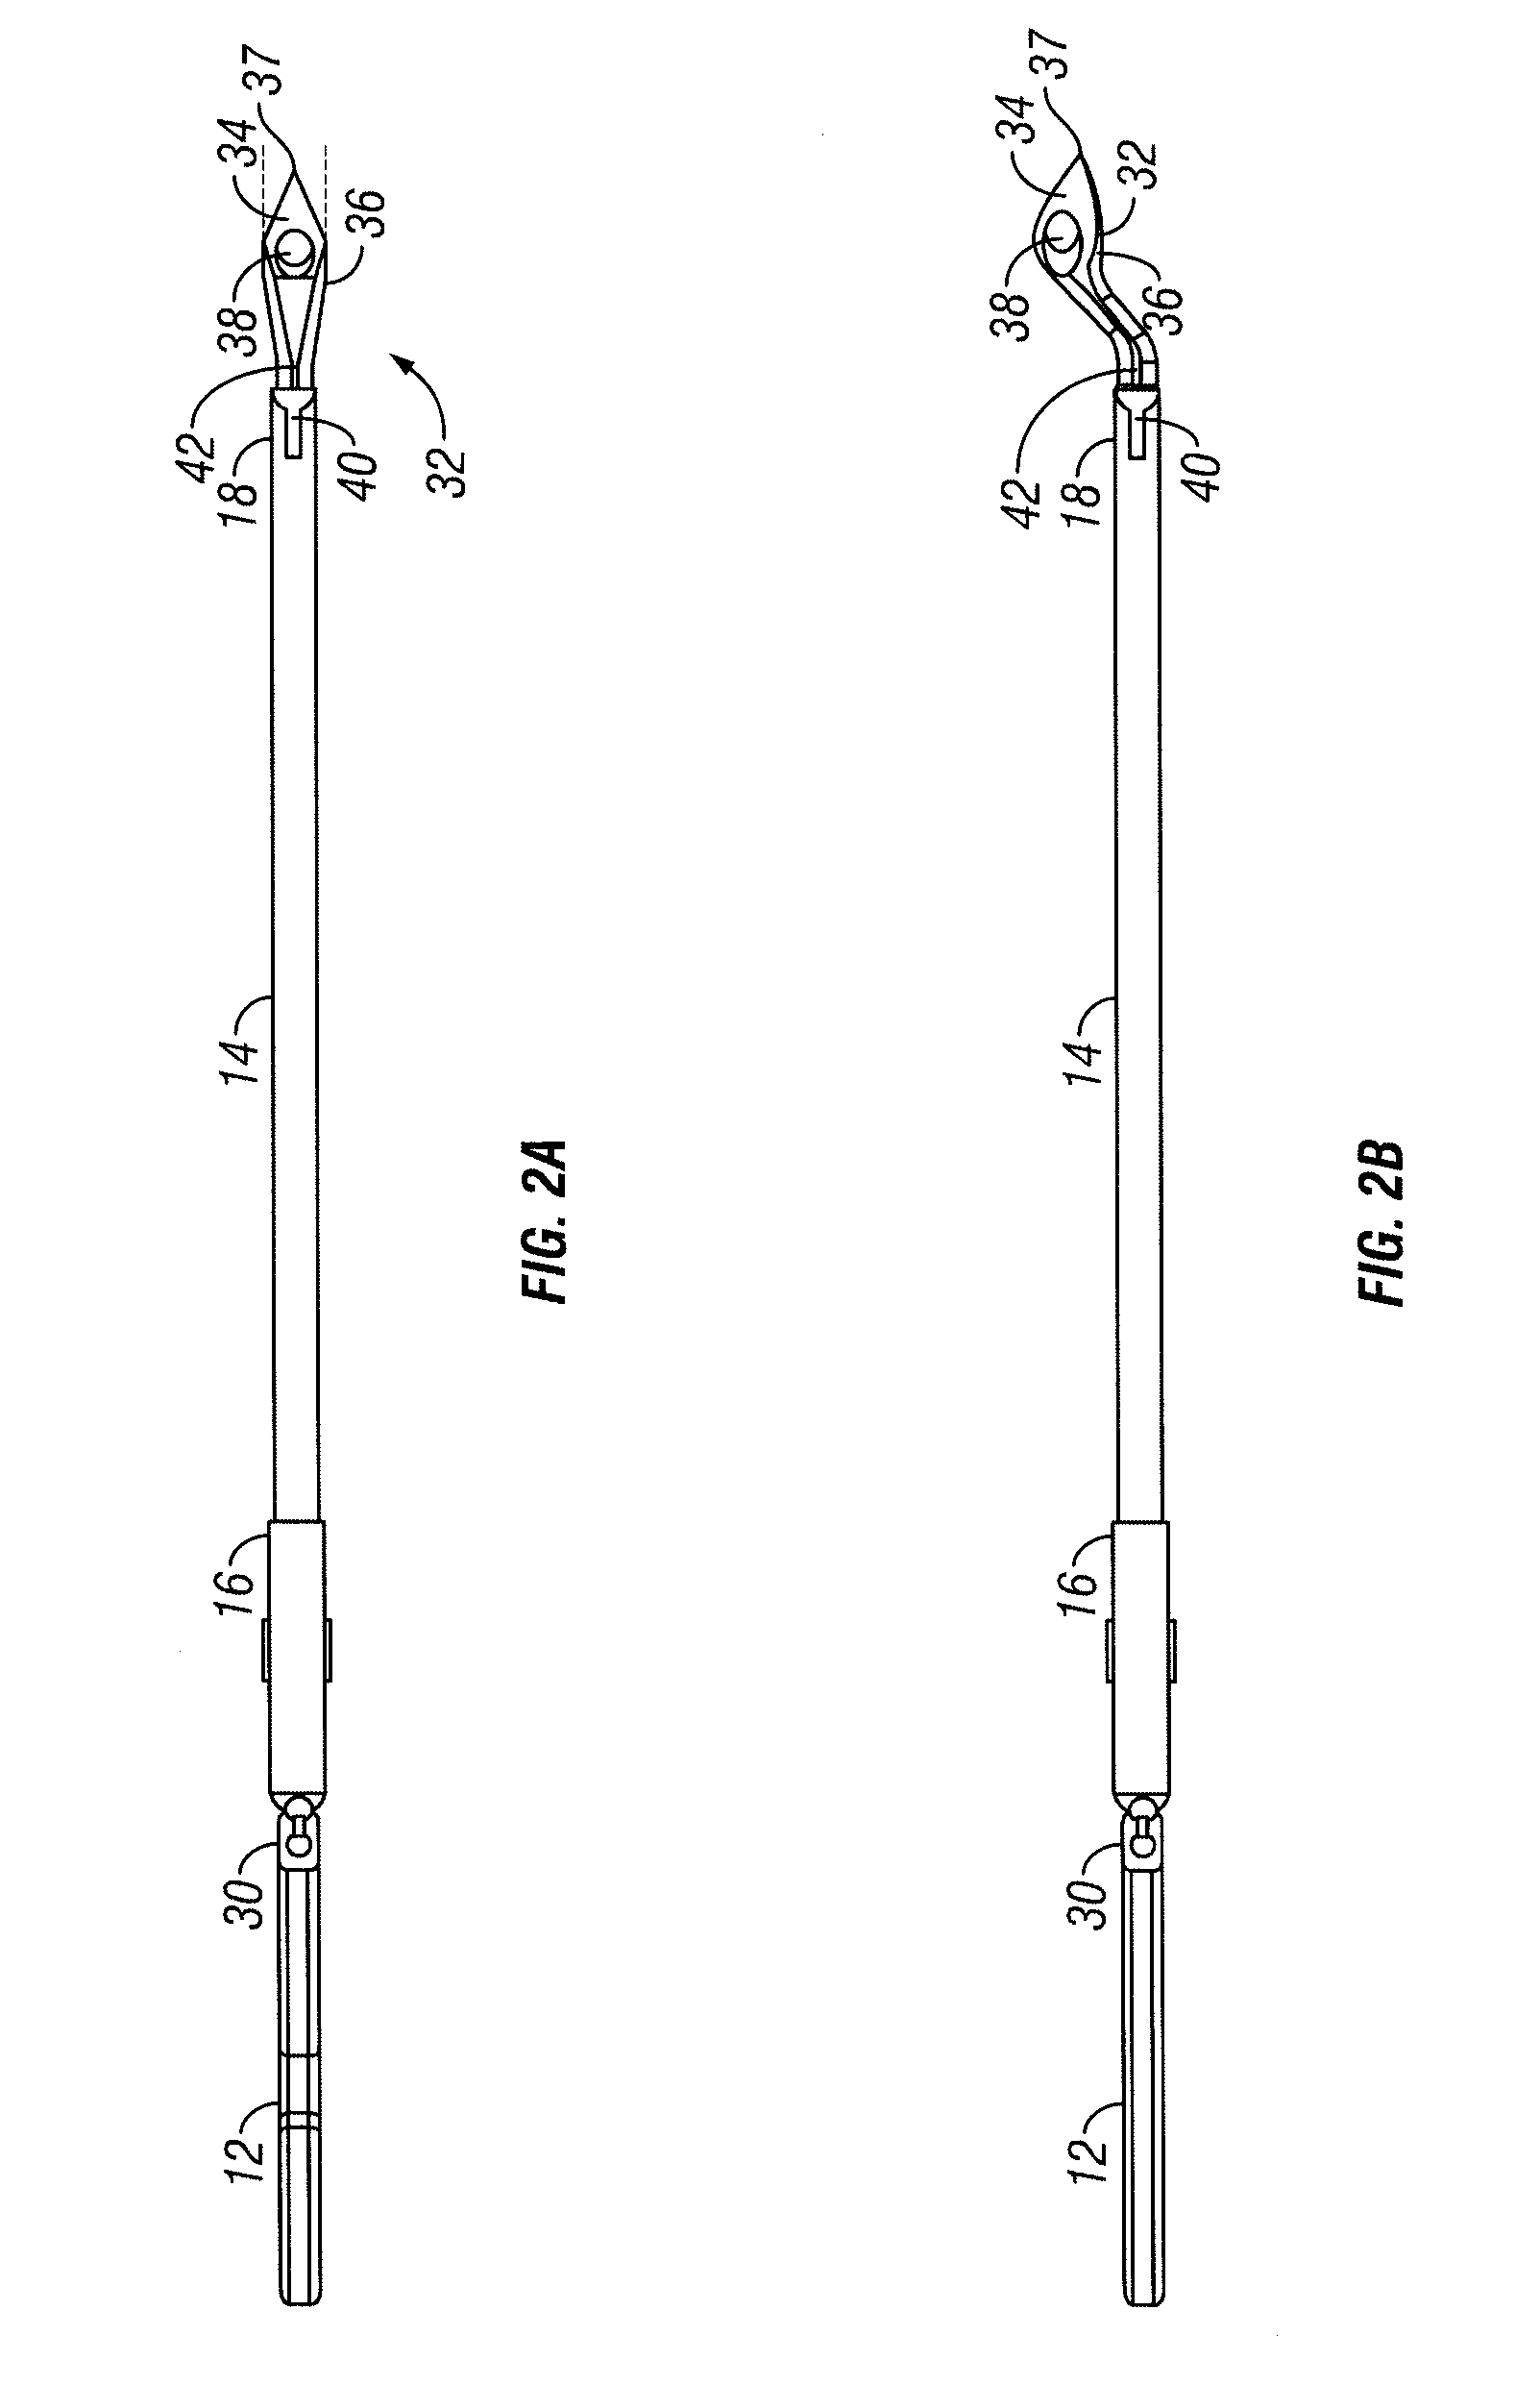 Surgical grasping device